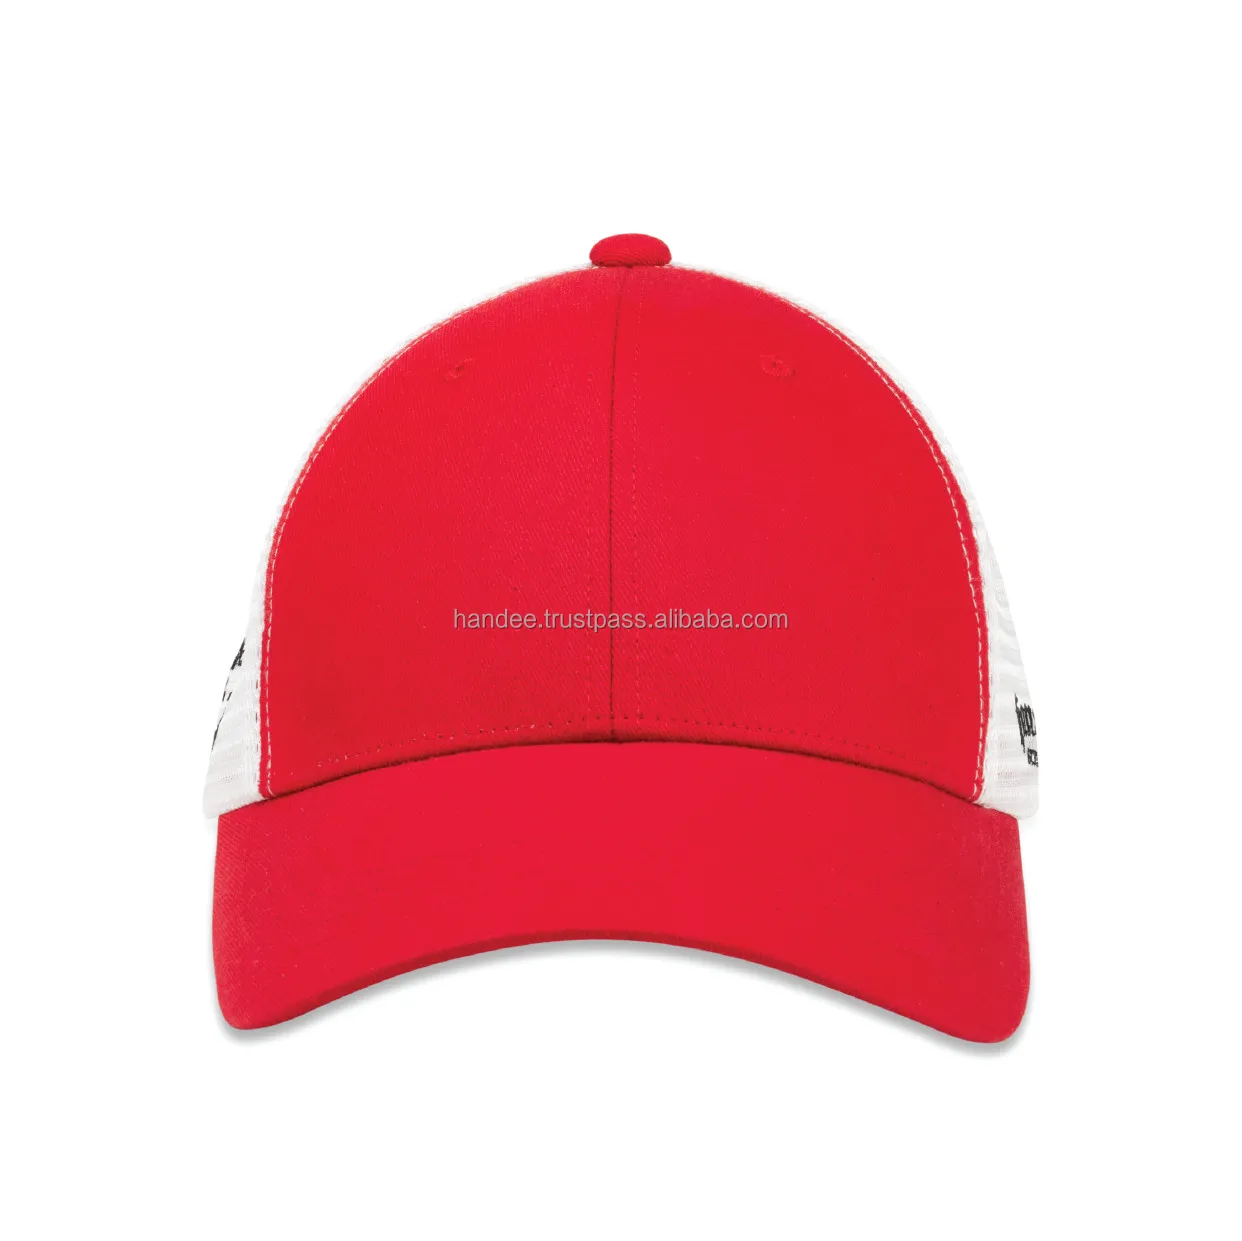 Wholer Customizable Golf Hats Custom Designs 100% Cotton High Quality Prompt Delivery